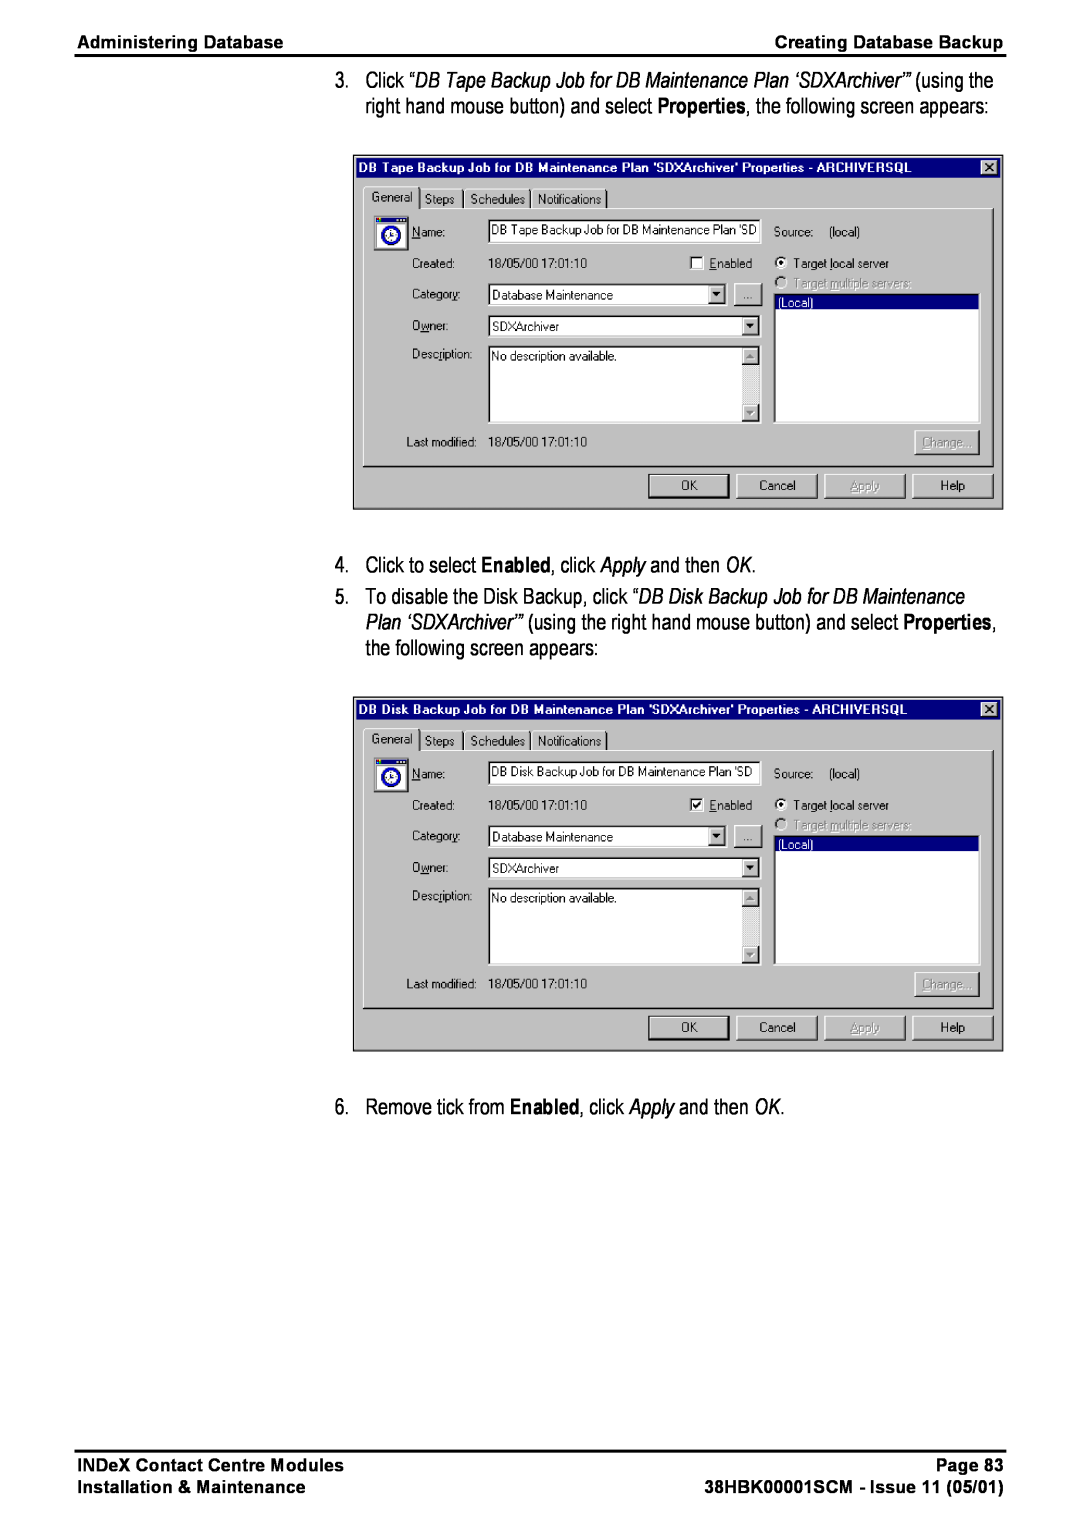 Avaya 38HBK00001SCM manual Click to select Enabled, click Apply and then OK 